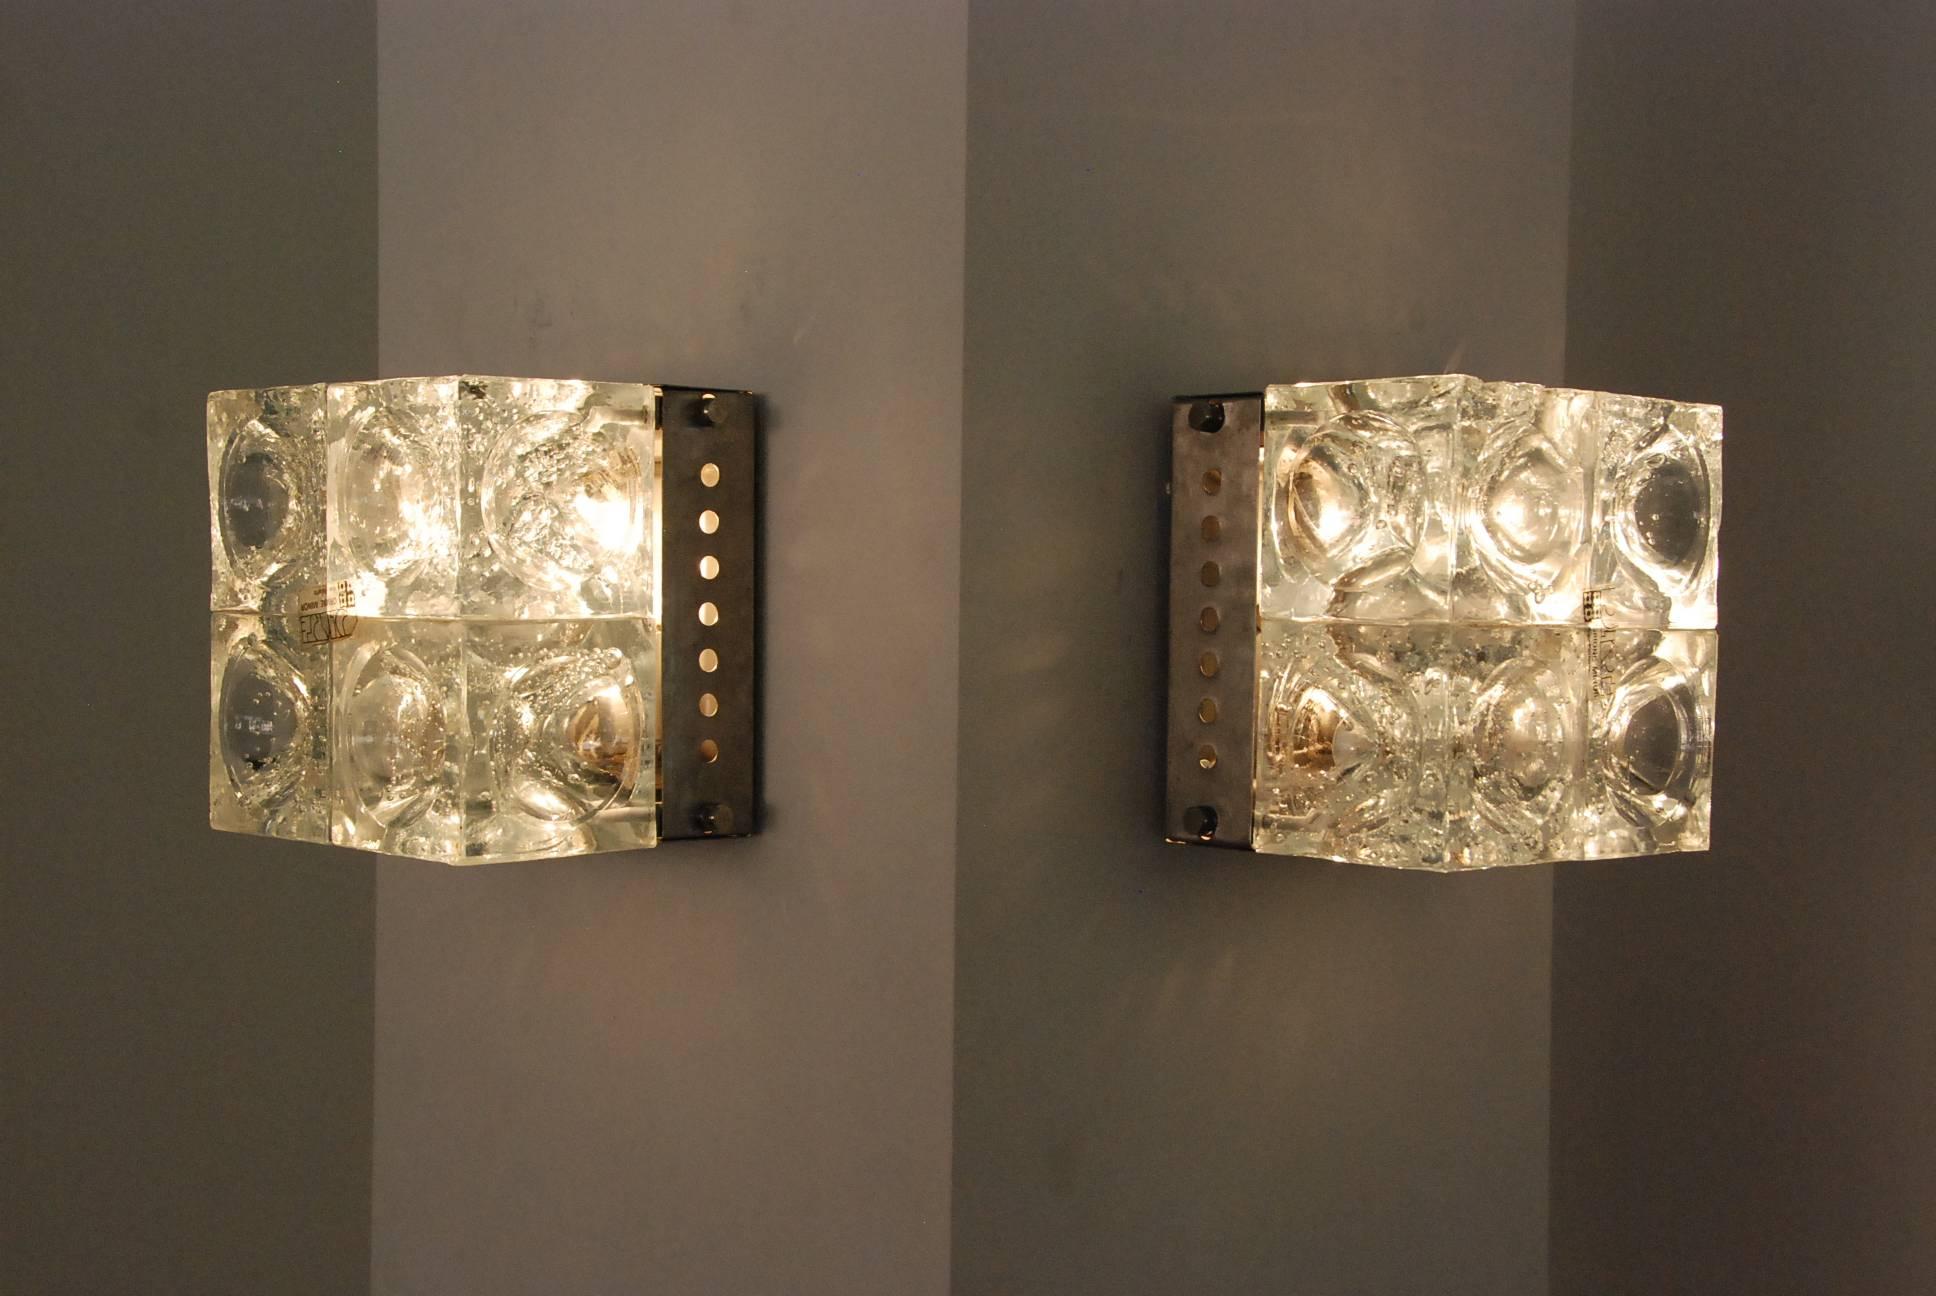 Pair of sconces in handcrafted Murano glass, Italy, 1970s,
by Poliarte workshop, all original condition. Very decorative.